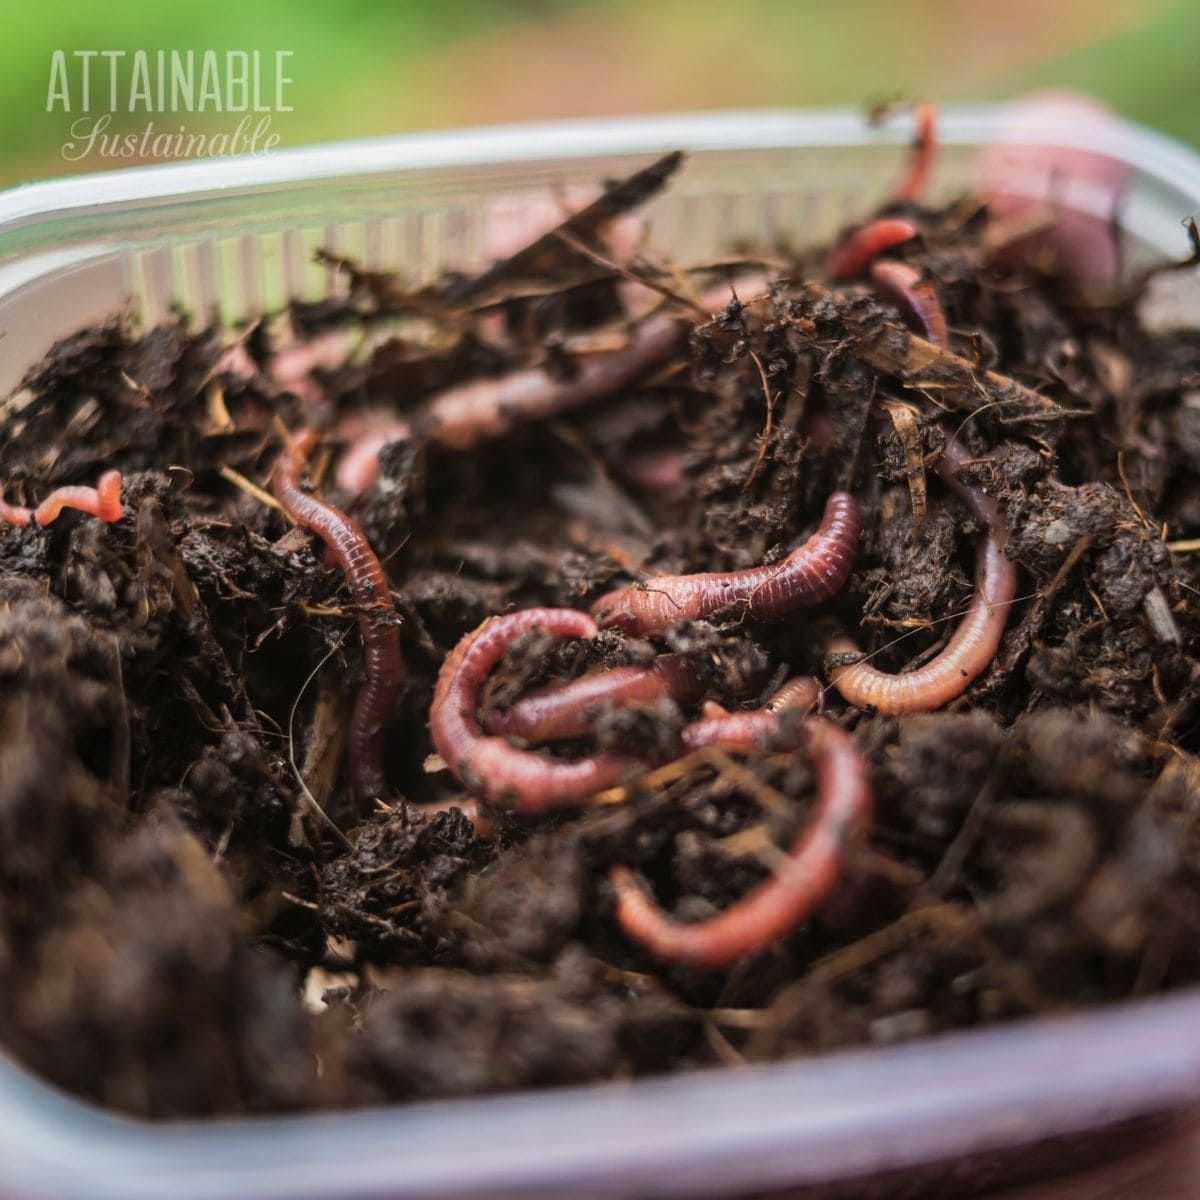 https://www.attainable-sustainable.net/wp-content/uploads/2019/03/diy-worm-composter-1.jpg